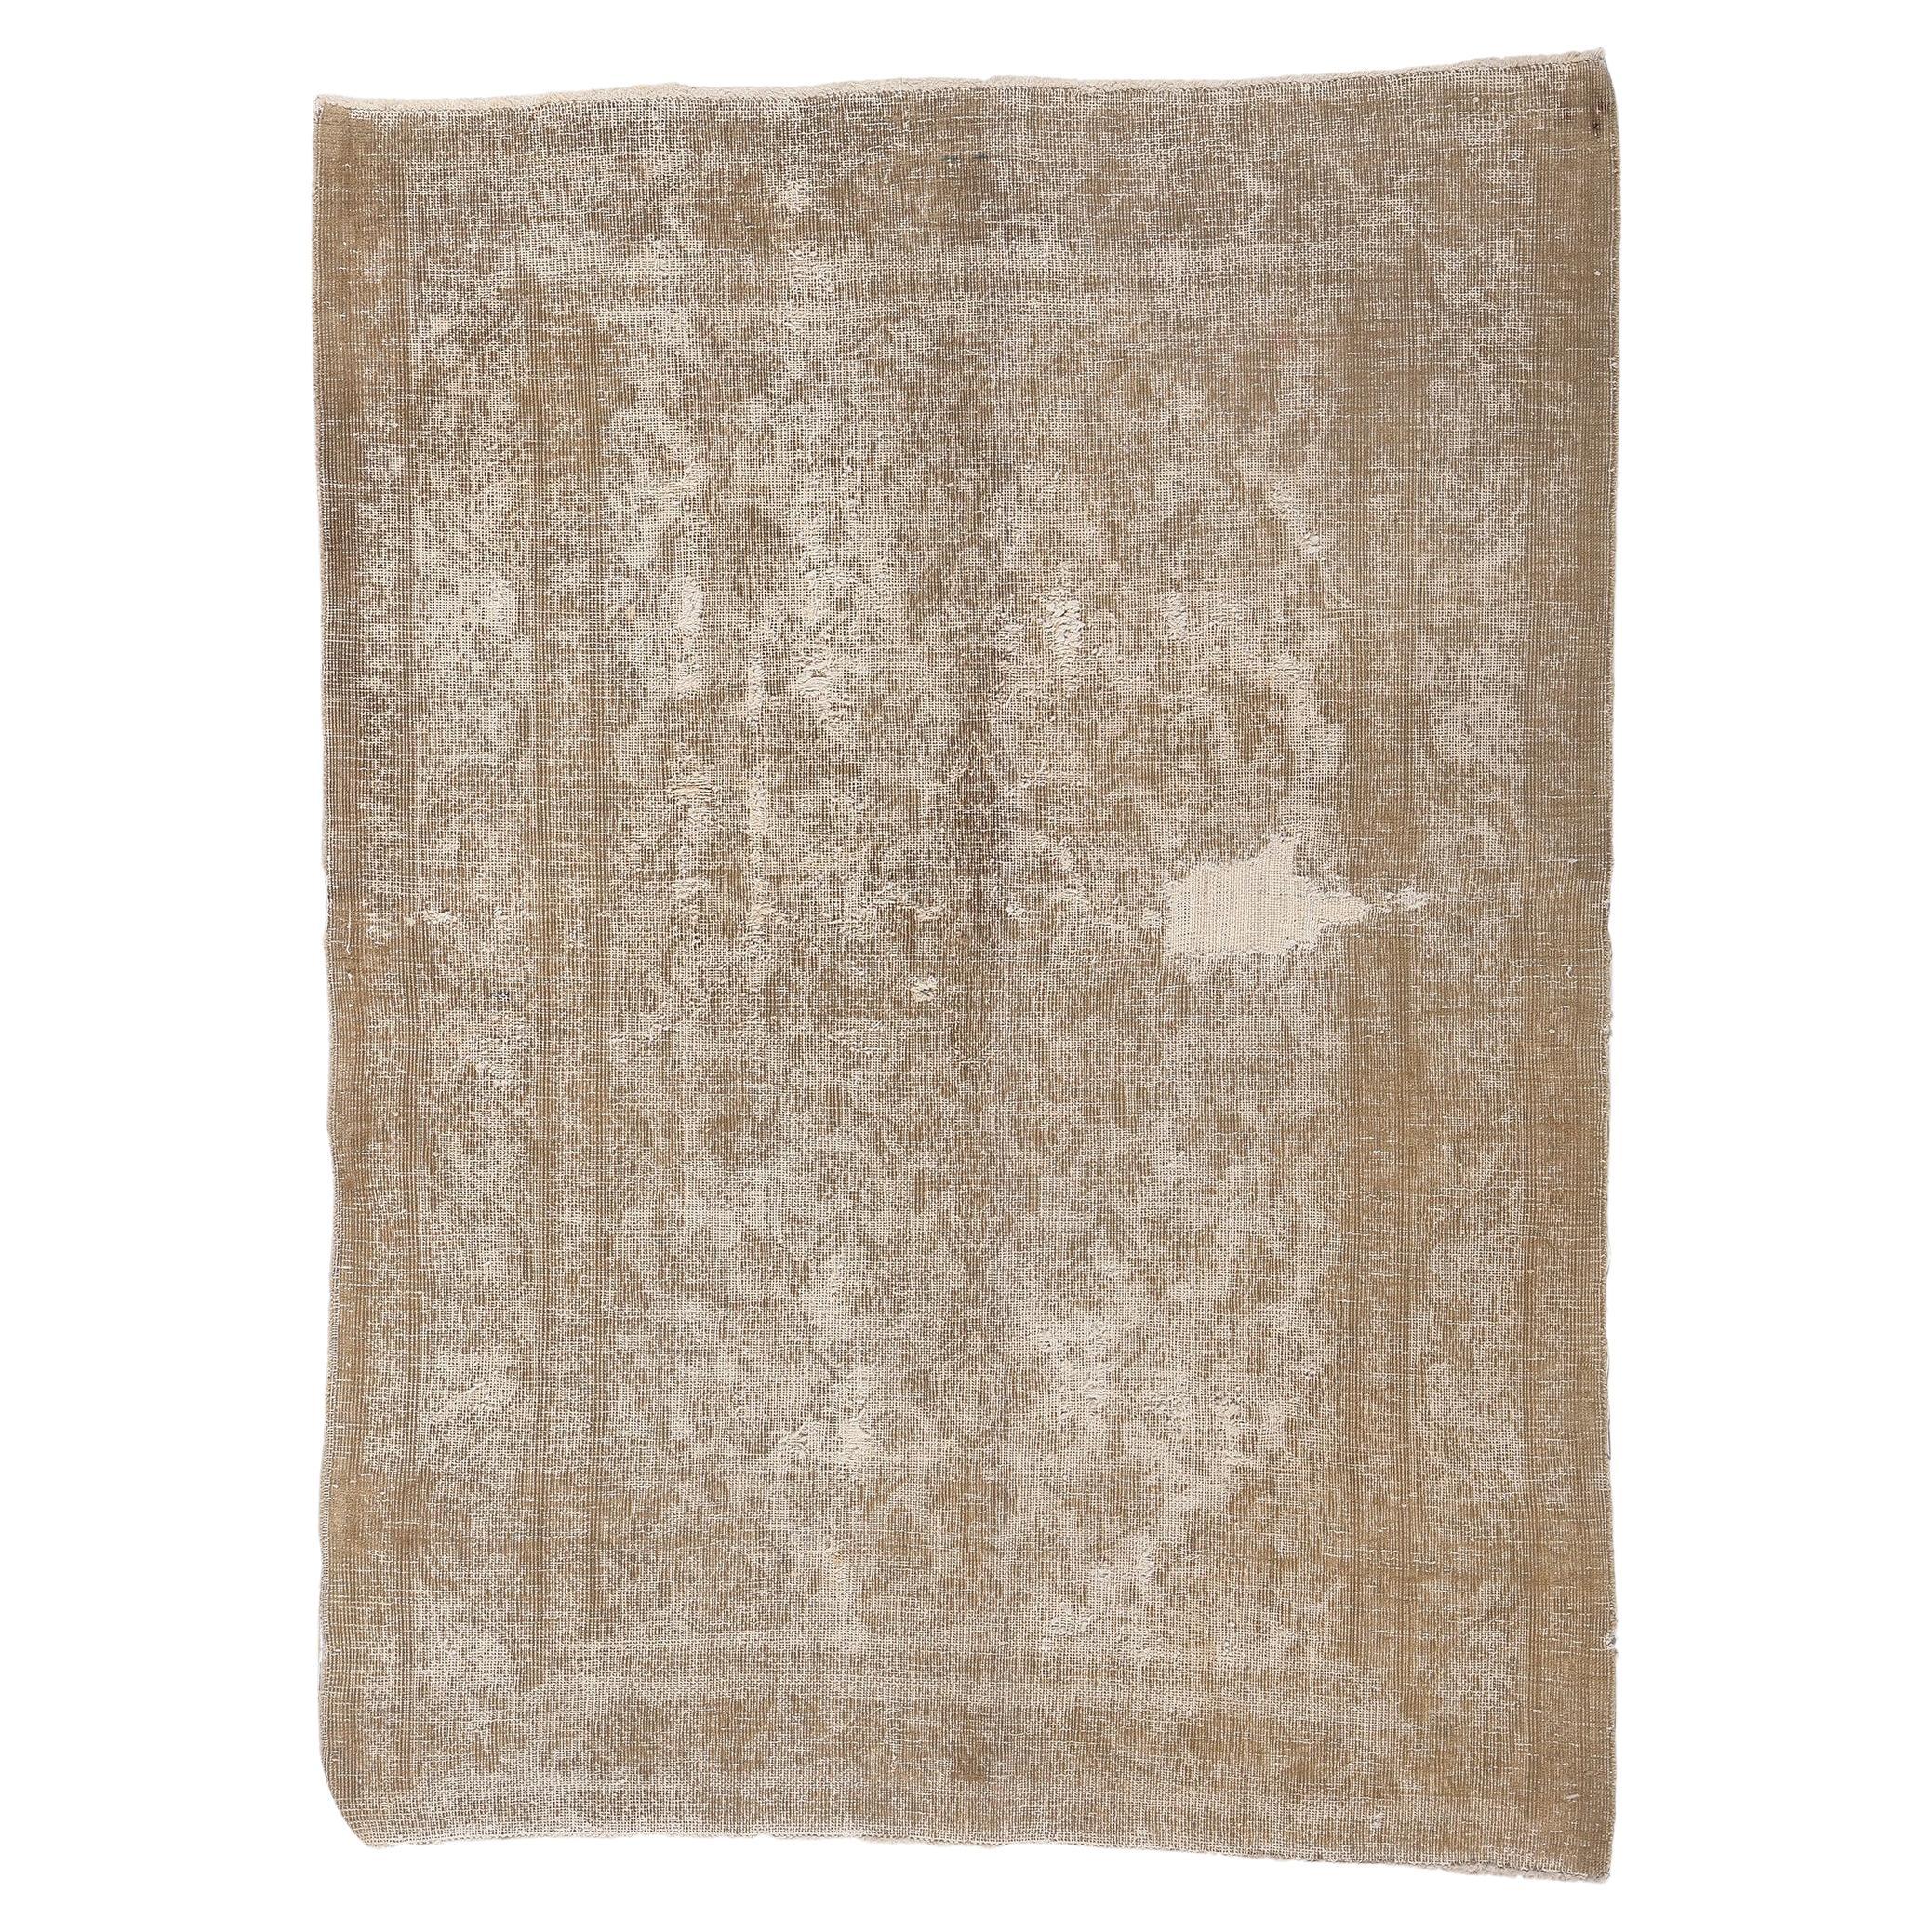 Distressed Faded Vintage Persian Rug, Earth-Tone Elegance Meets Modern Luxe For Sale